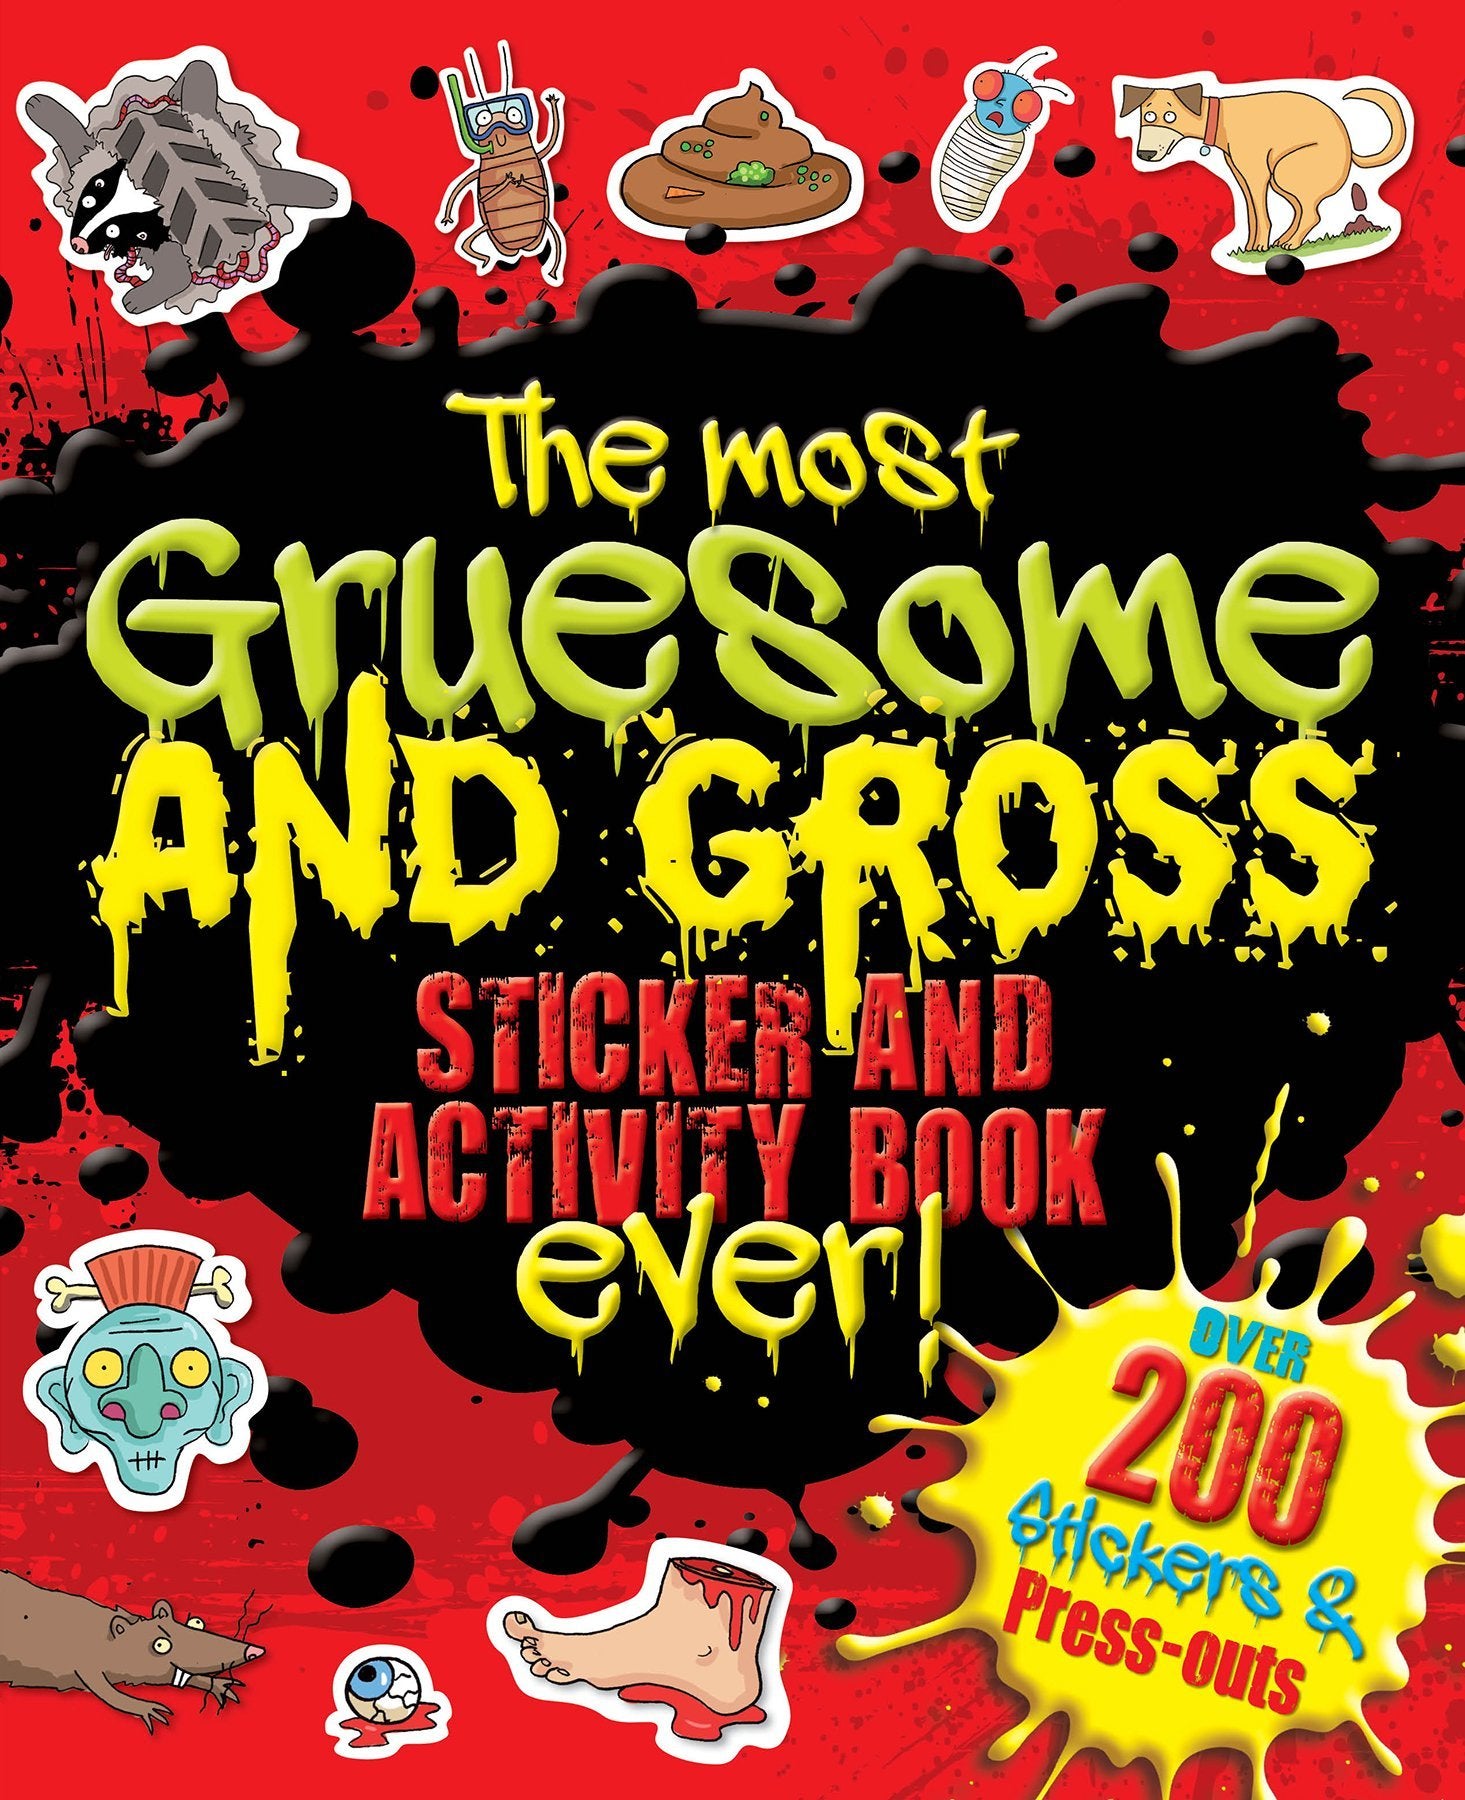 The Most Gruesome And Gross - Sticker And Activity Book